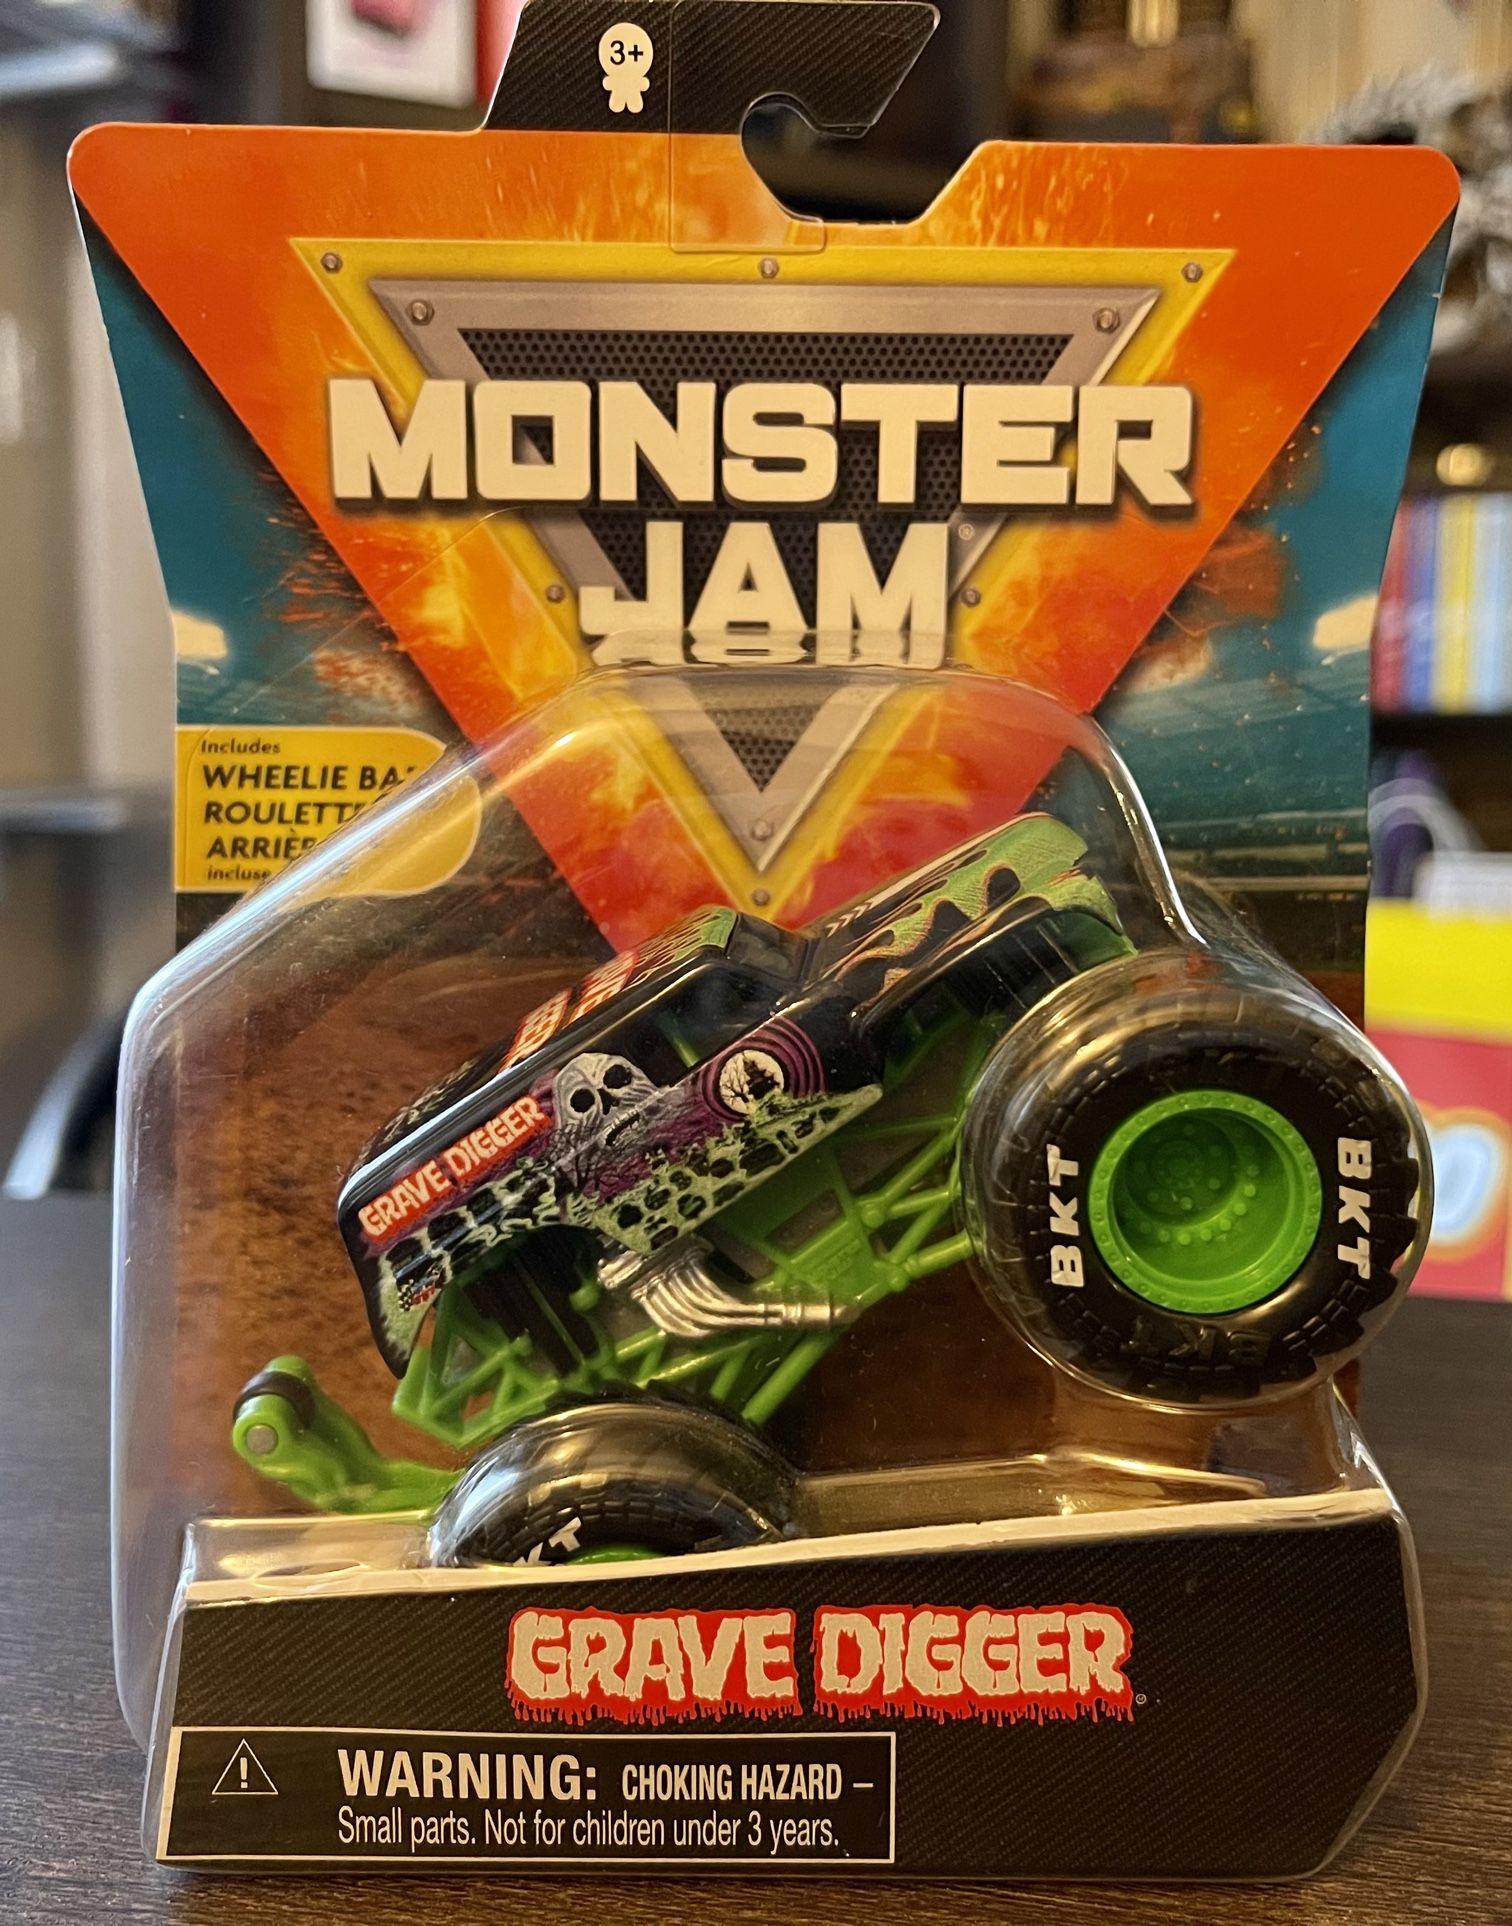 Monster Jam Truck - Grave Digger - 1:64 Scale